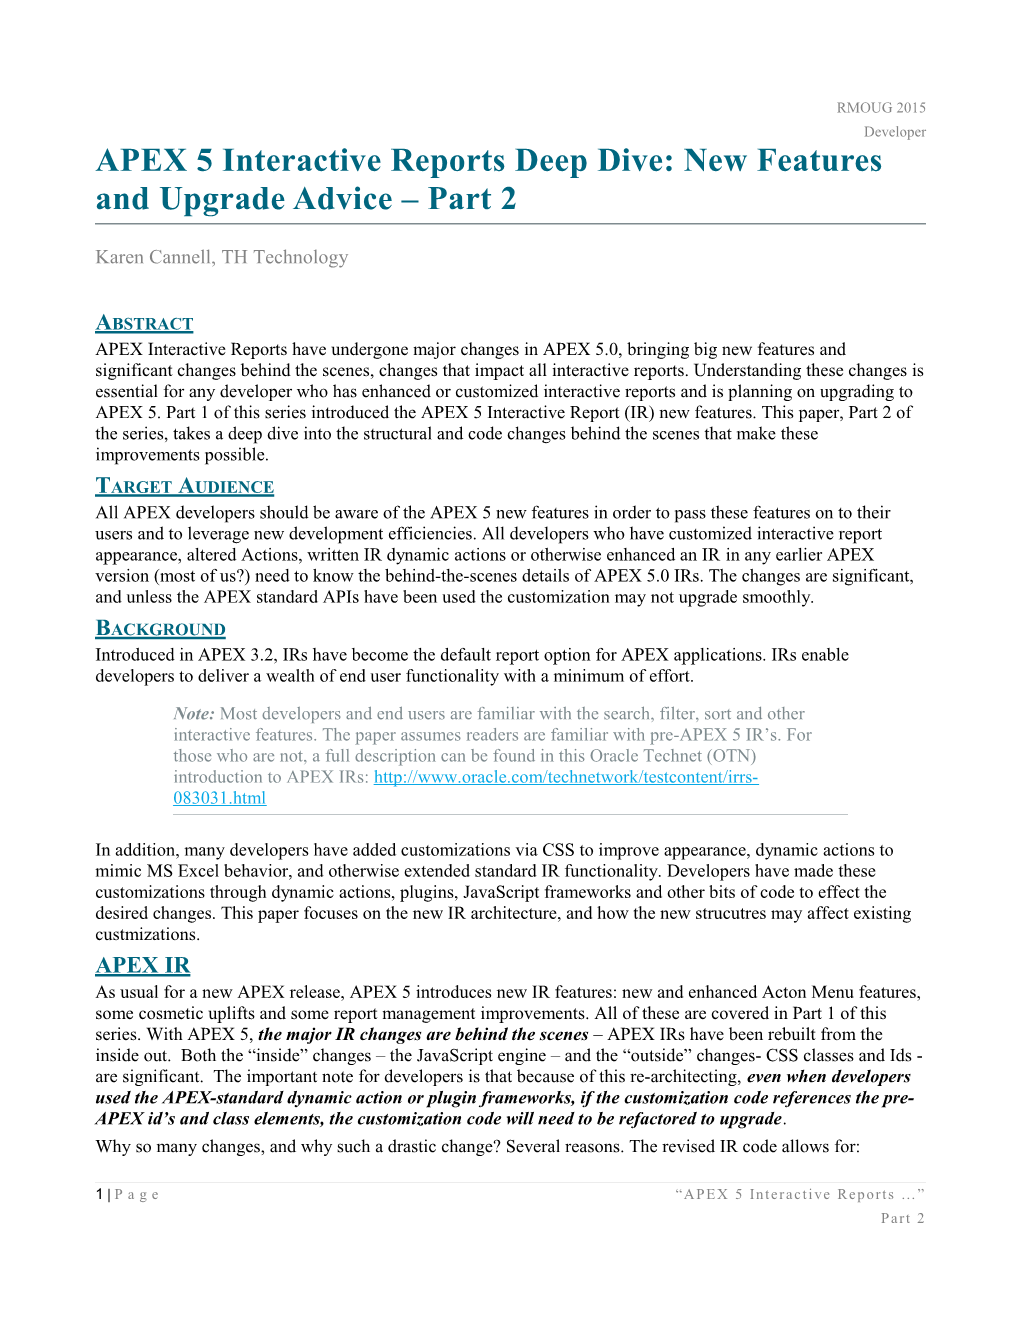 APEX 5 Interactive Reports Deep Dive: New Features and Upgrade Advice Part 2